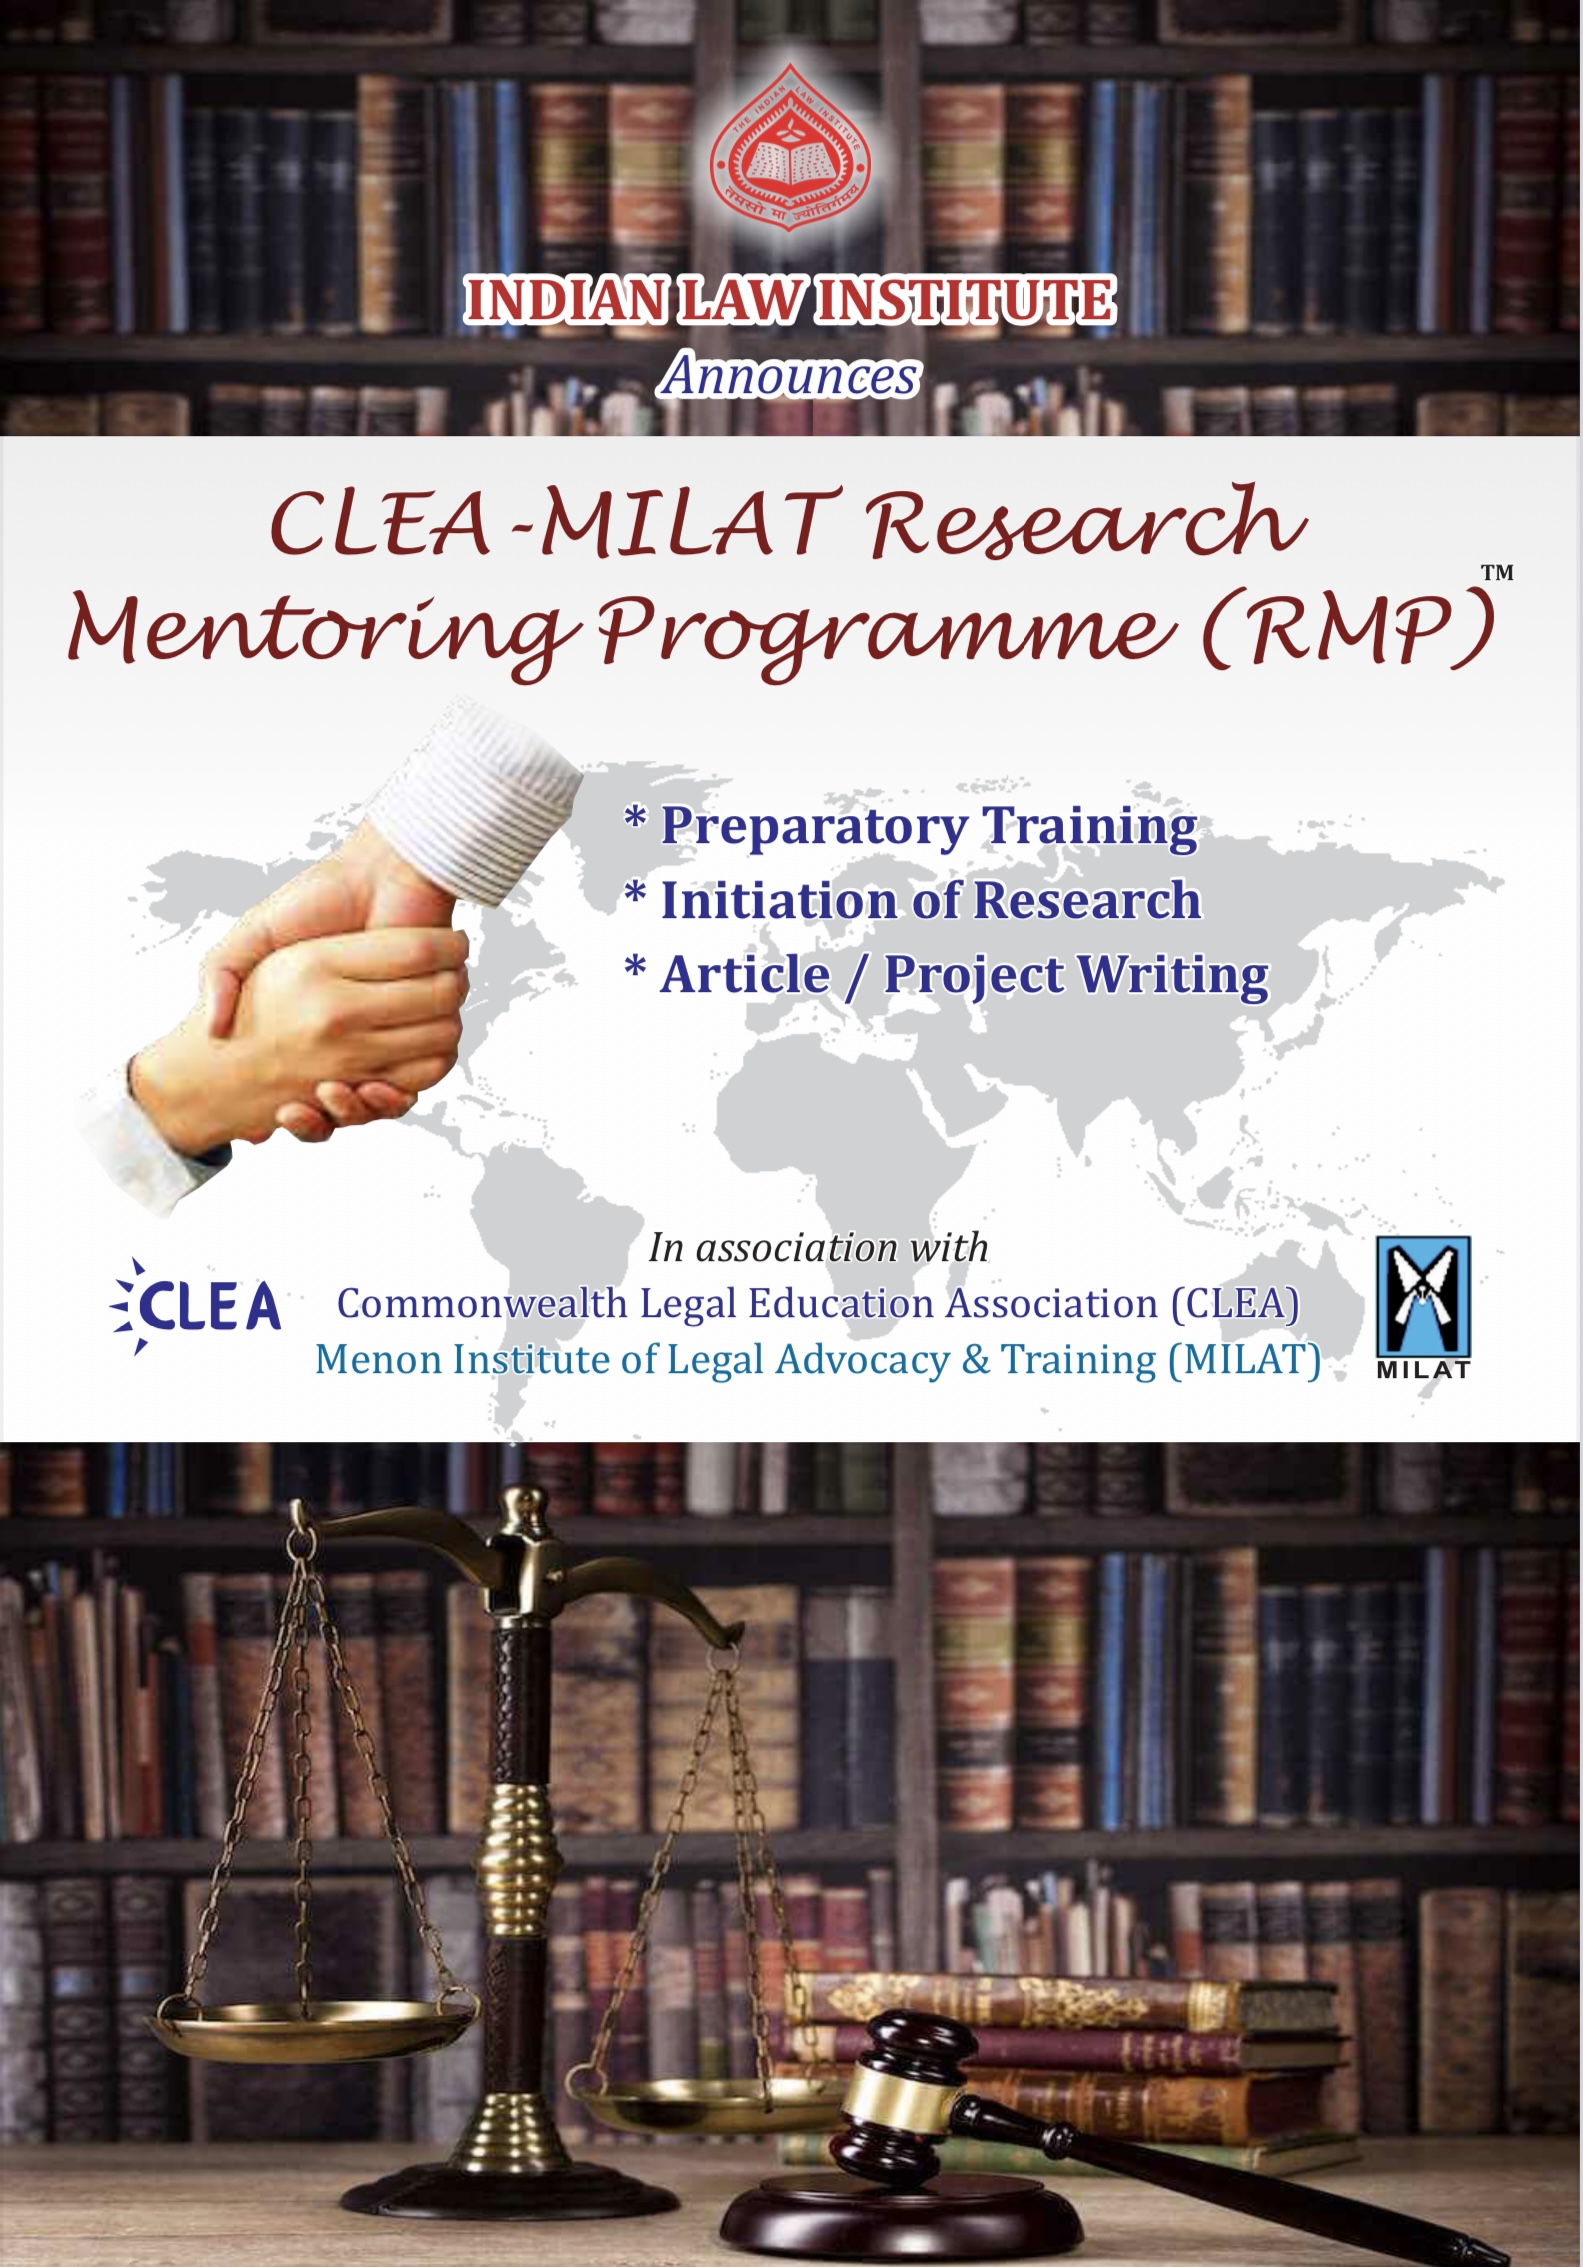 CLEA-MILAT Research Mentoring Programme (RMP) : By Indian Law Institute.